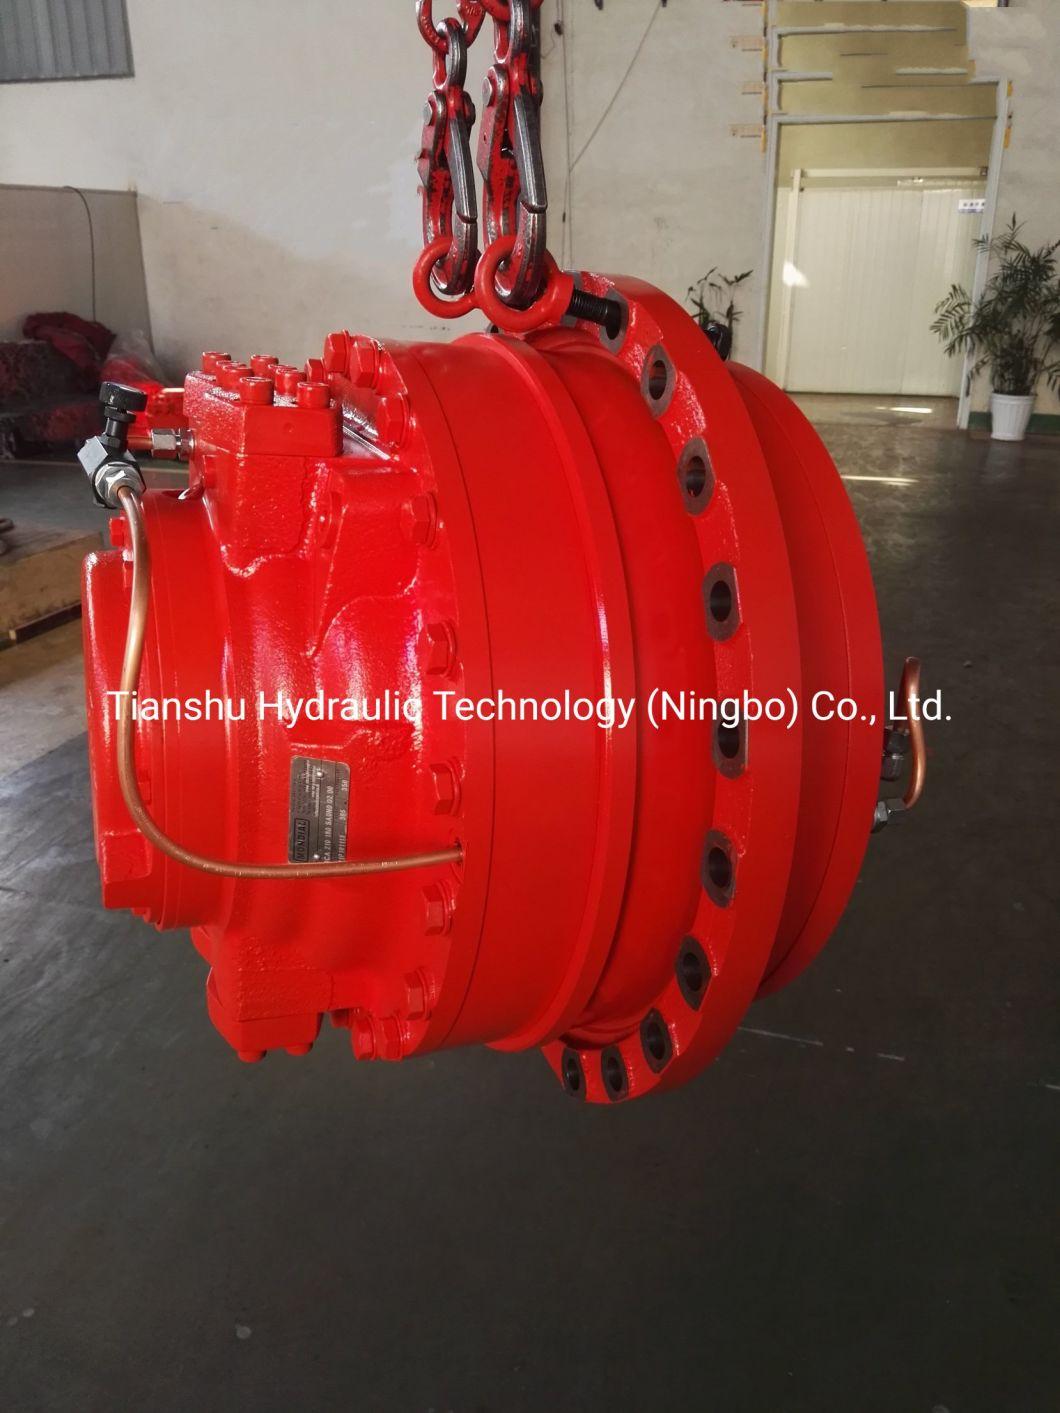 Ca70 Hagglunds Hydraulic Motor with Reducer and Control Valve